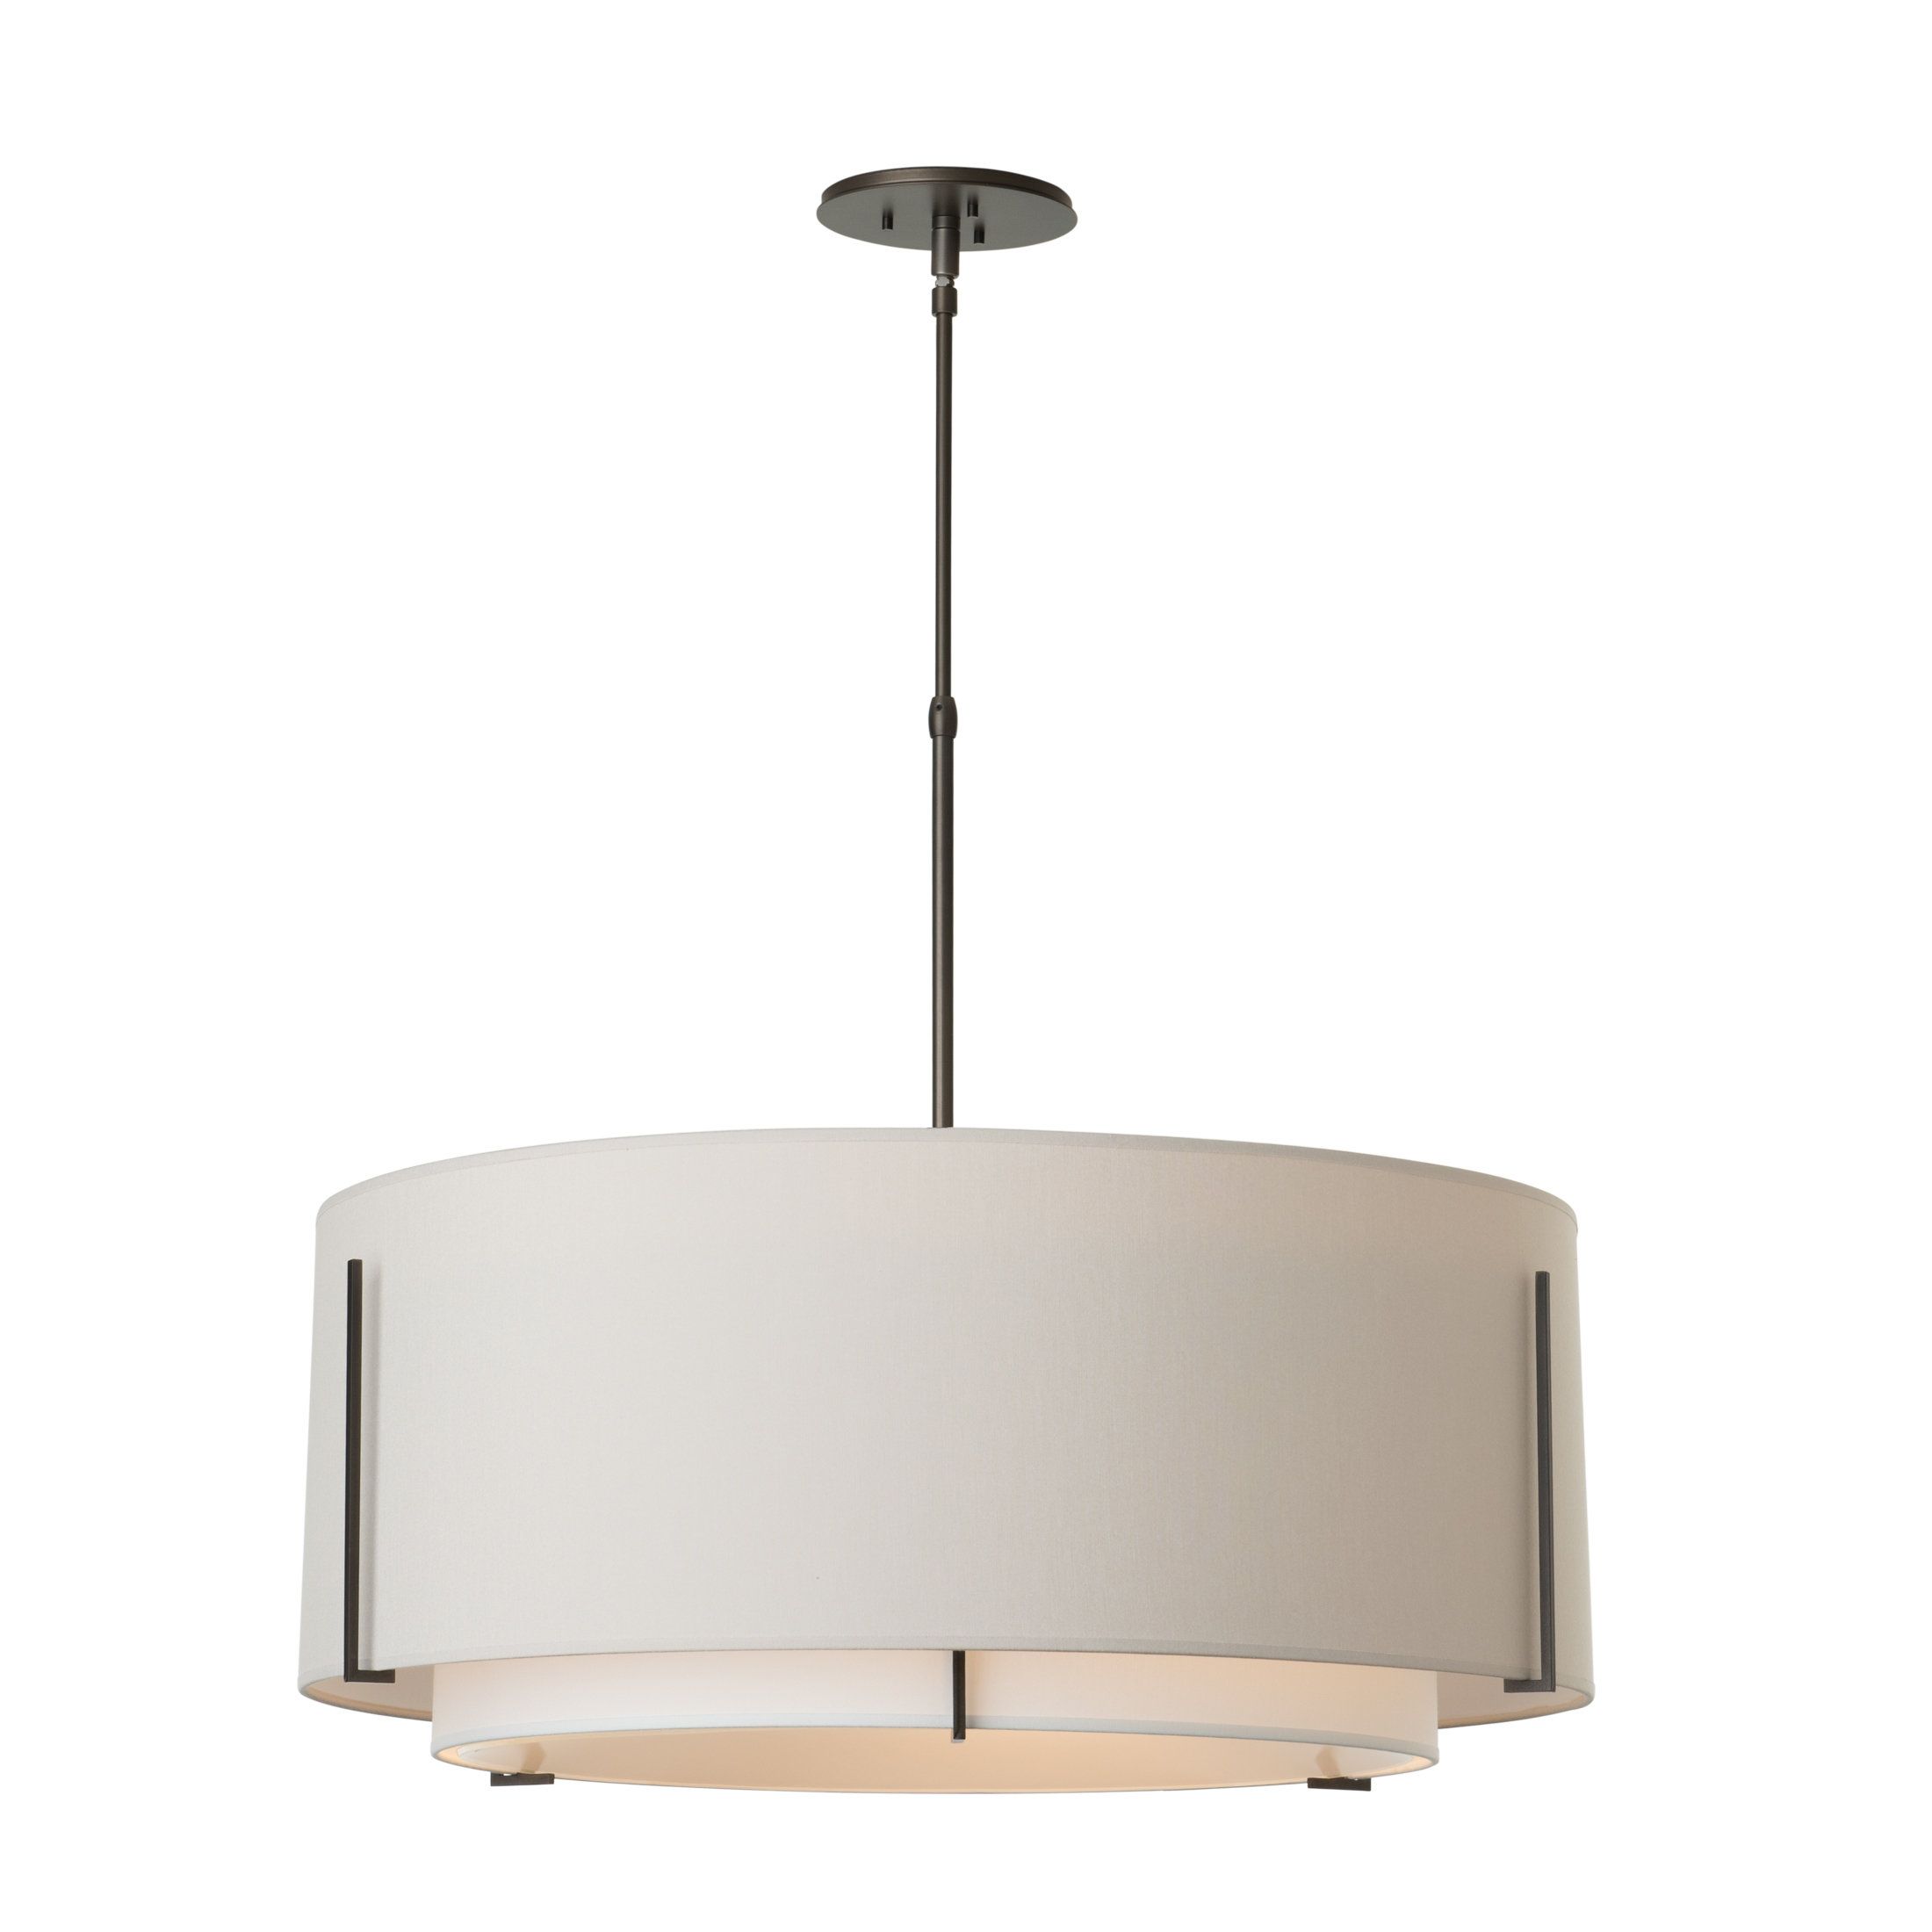 Most Popular Black Drum Pendant Lighting You'll Love In  (View 9 of 25)